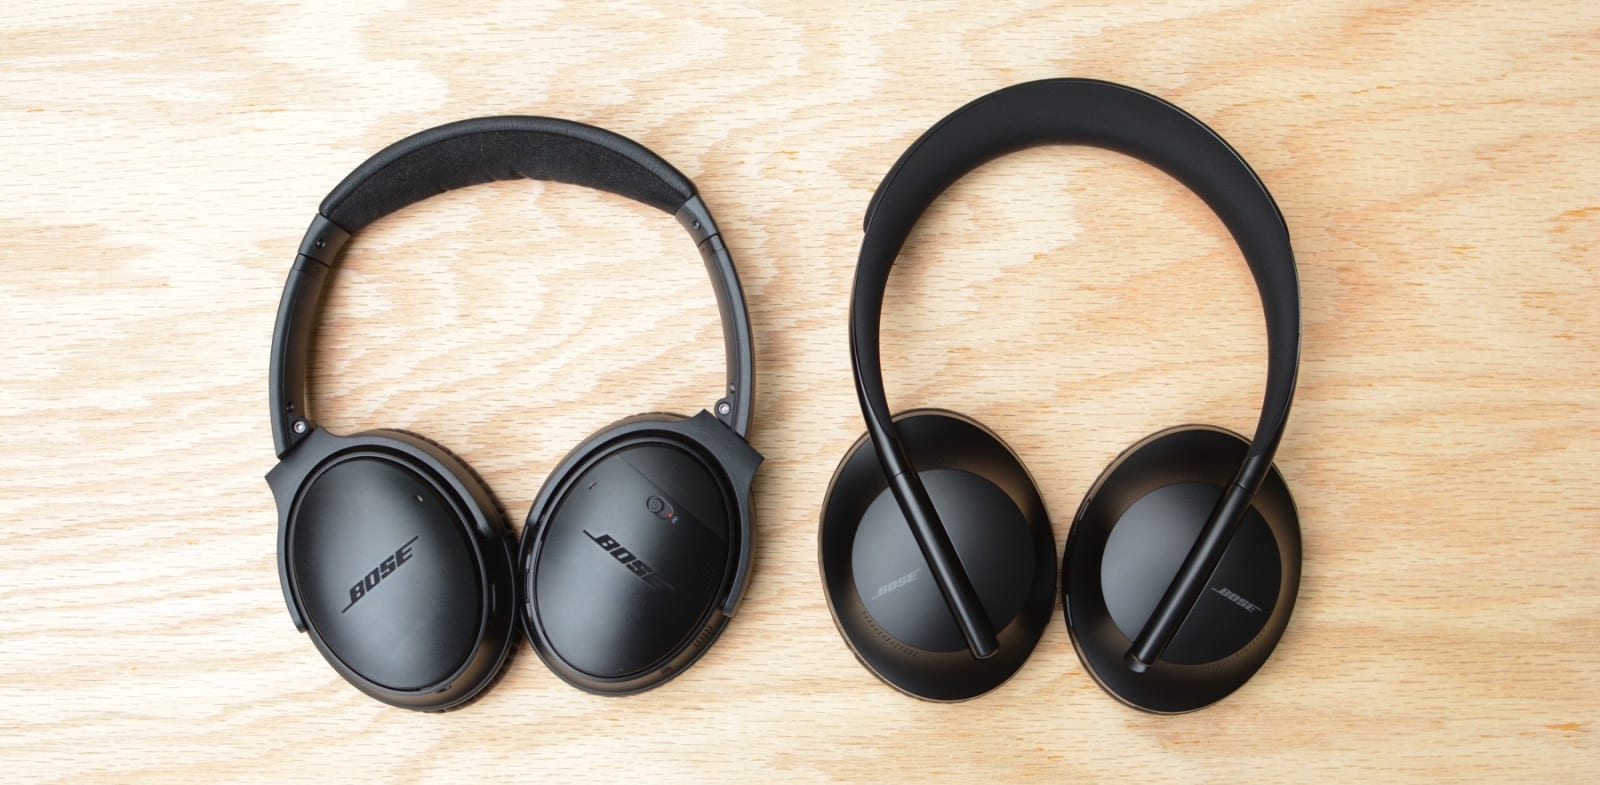 Bose 700 headphones review: The pursuit of perfection |